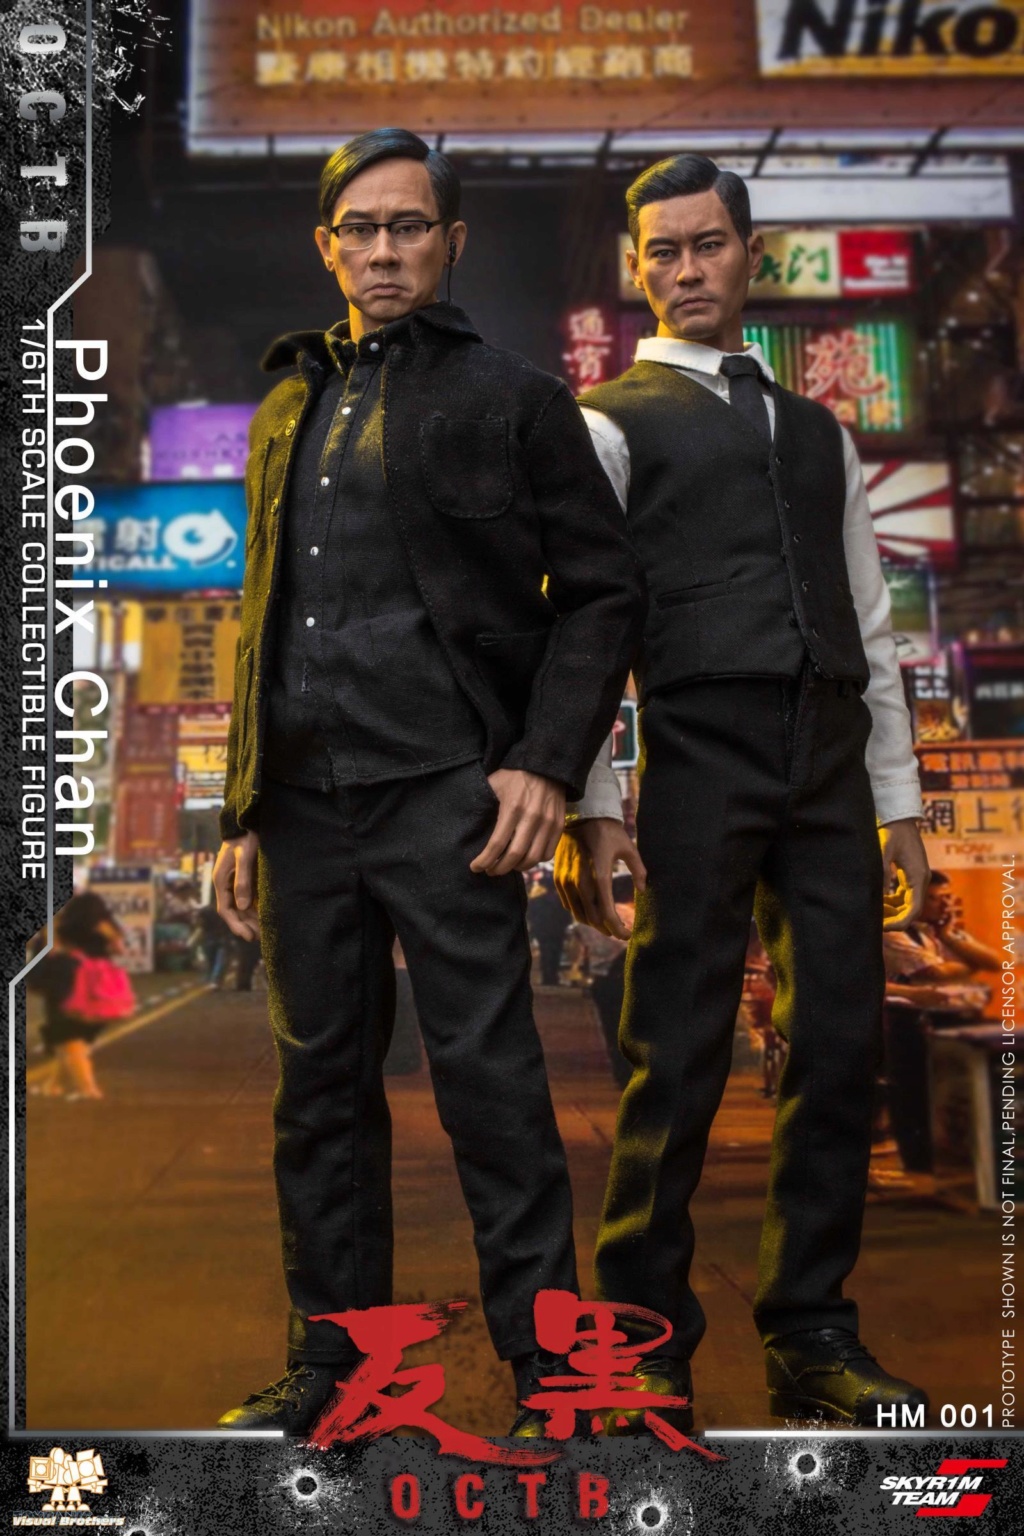 police - NEW PRODUCT: Skyr1m Team: 1/6 scale OCTB Phoenix Chan Action Figure (HM001) 322